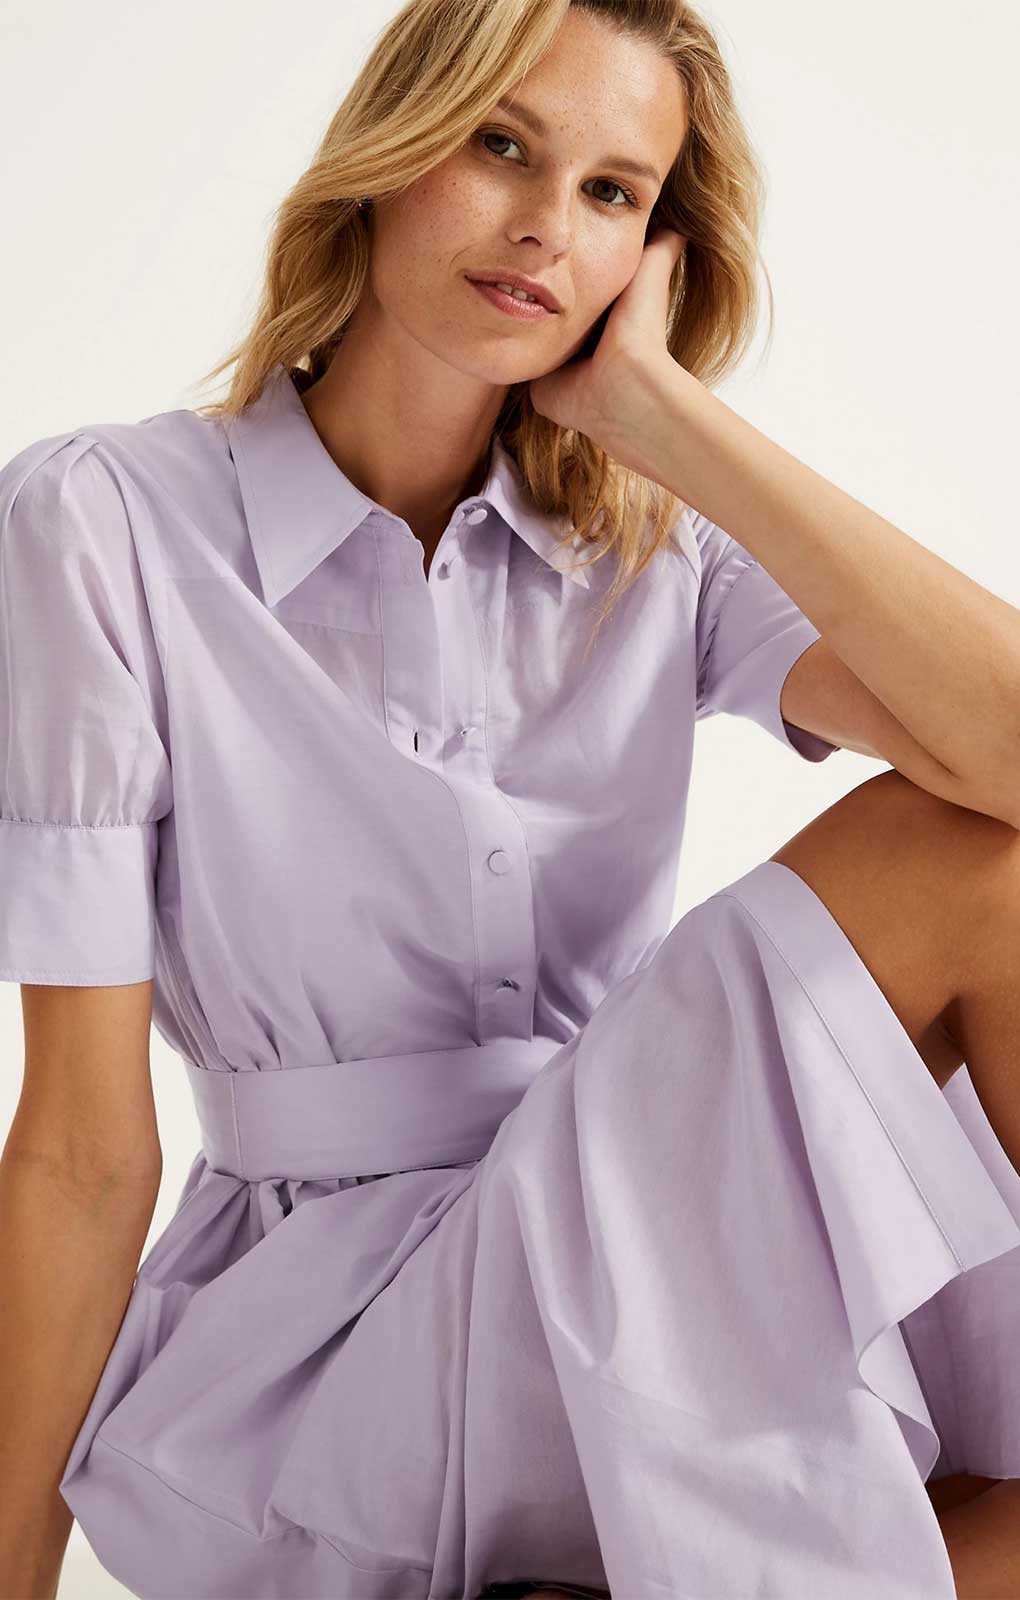 M&S AUTOGRAPH Silk Blend Belted Midaxi Tiered Dress product image